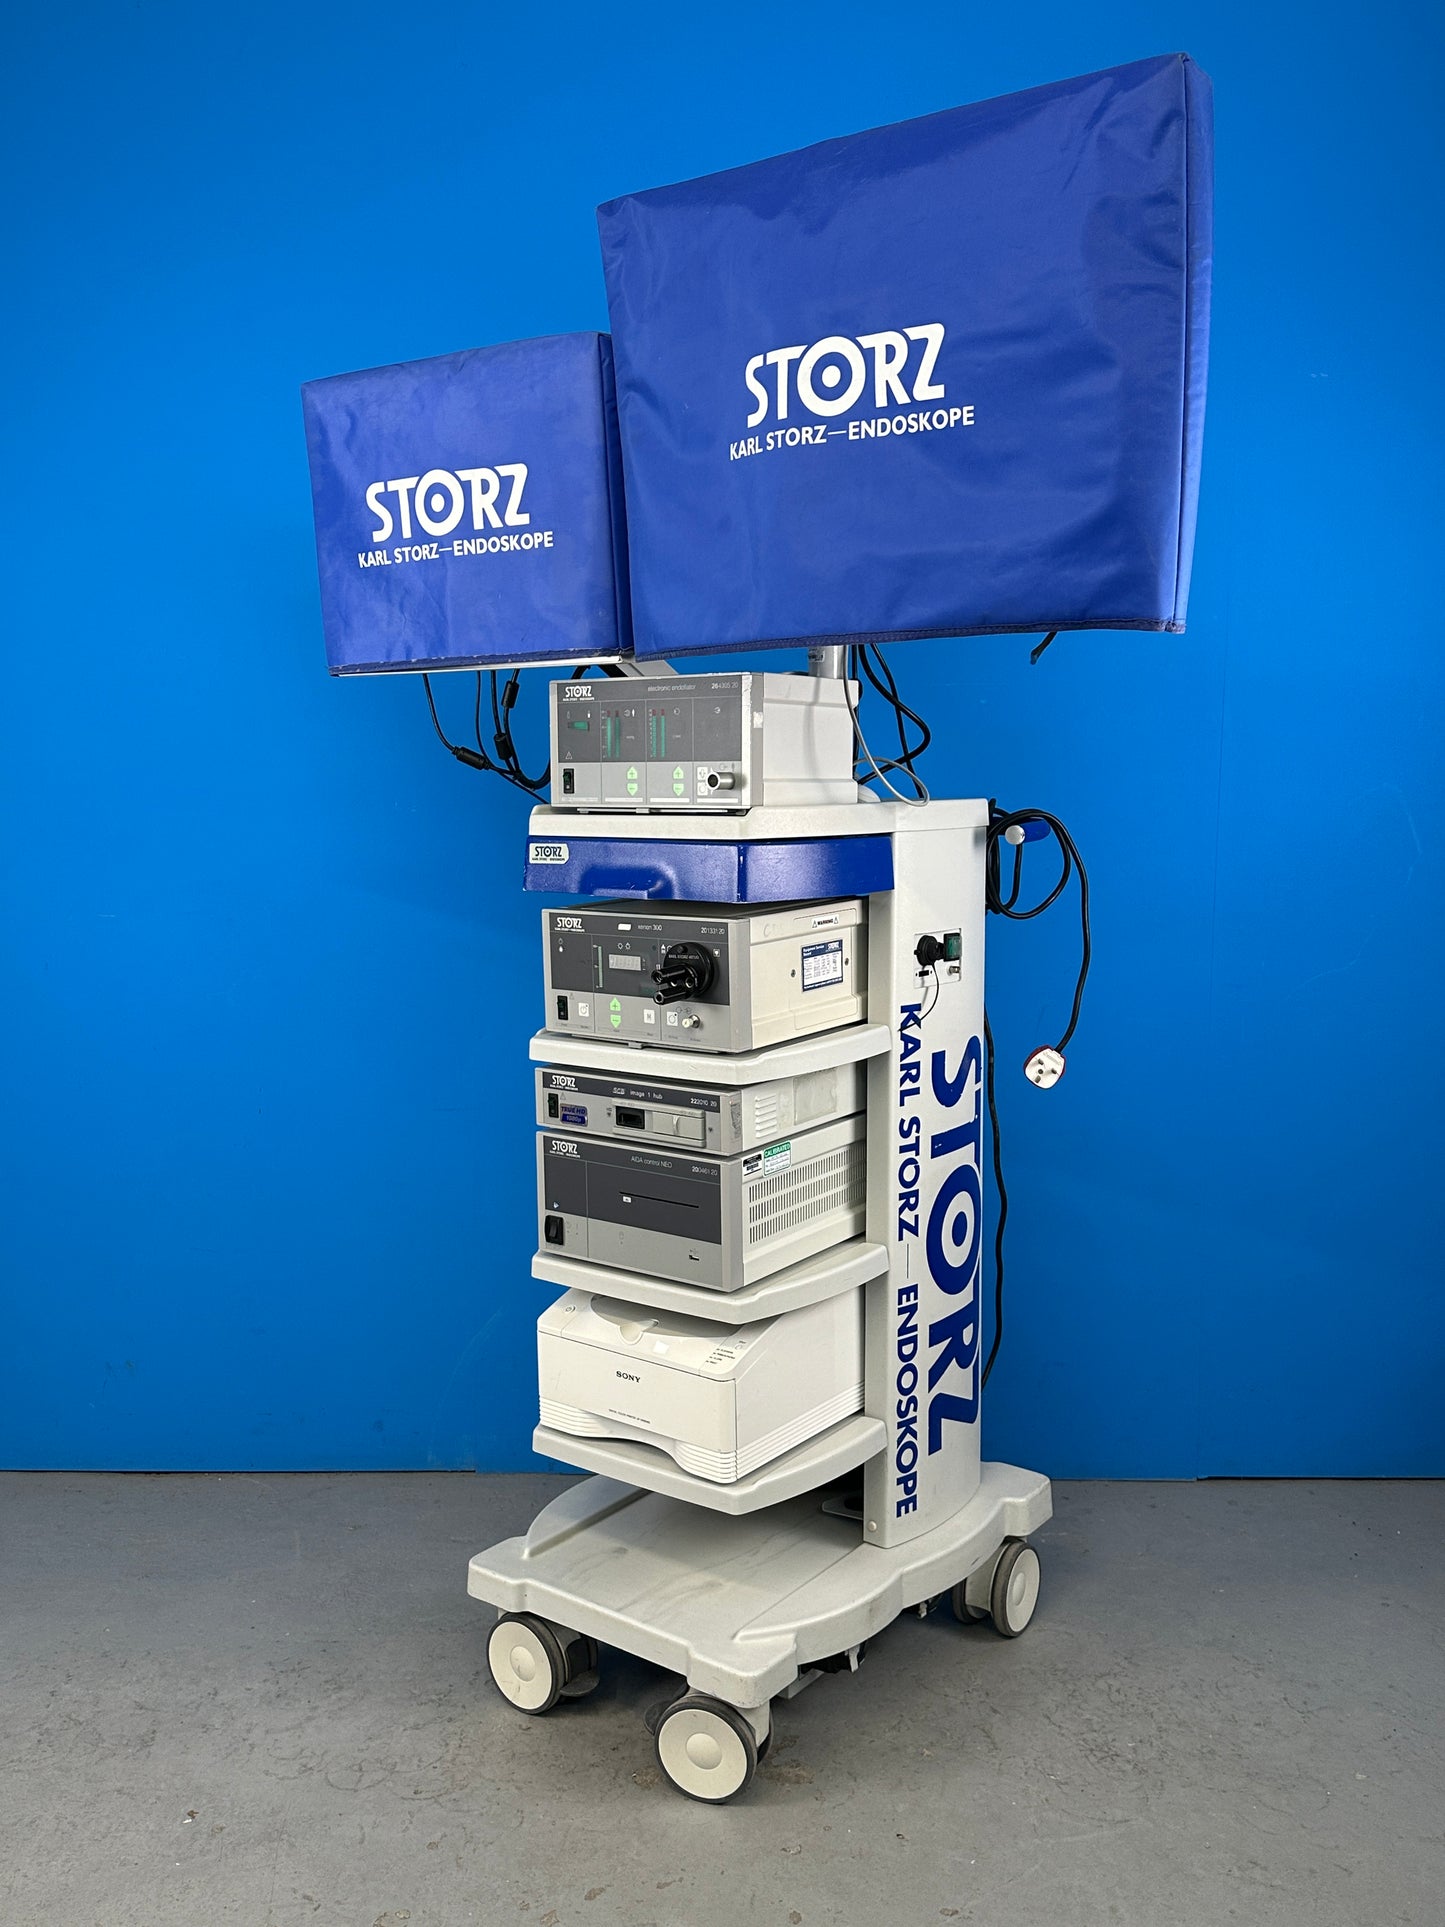 all the components of Storz image 1 hub dual channel laparoscopy system are functional